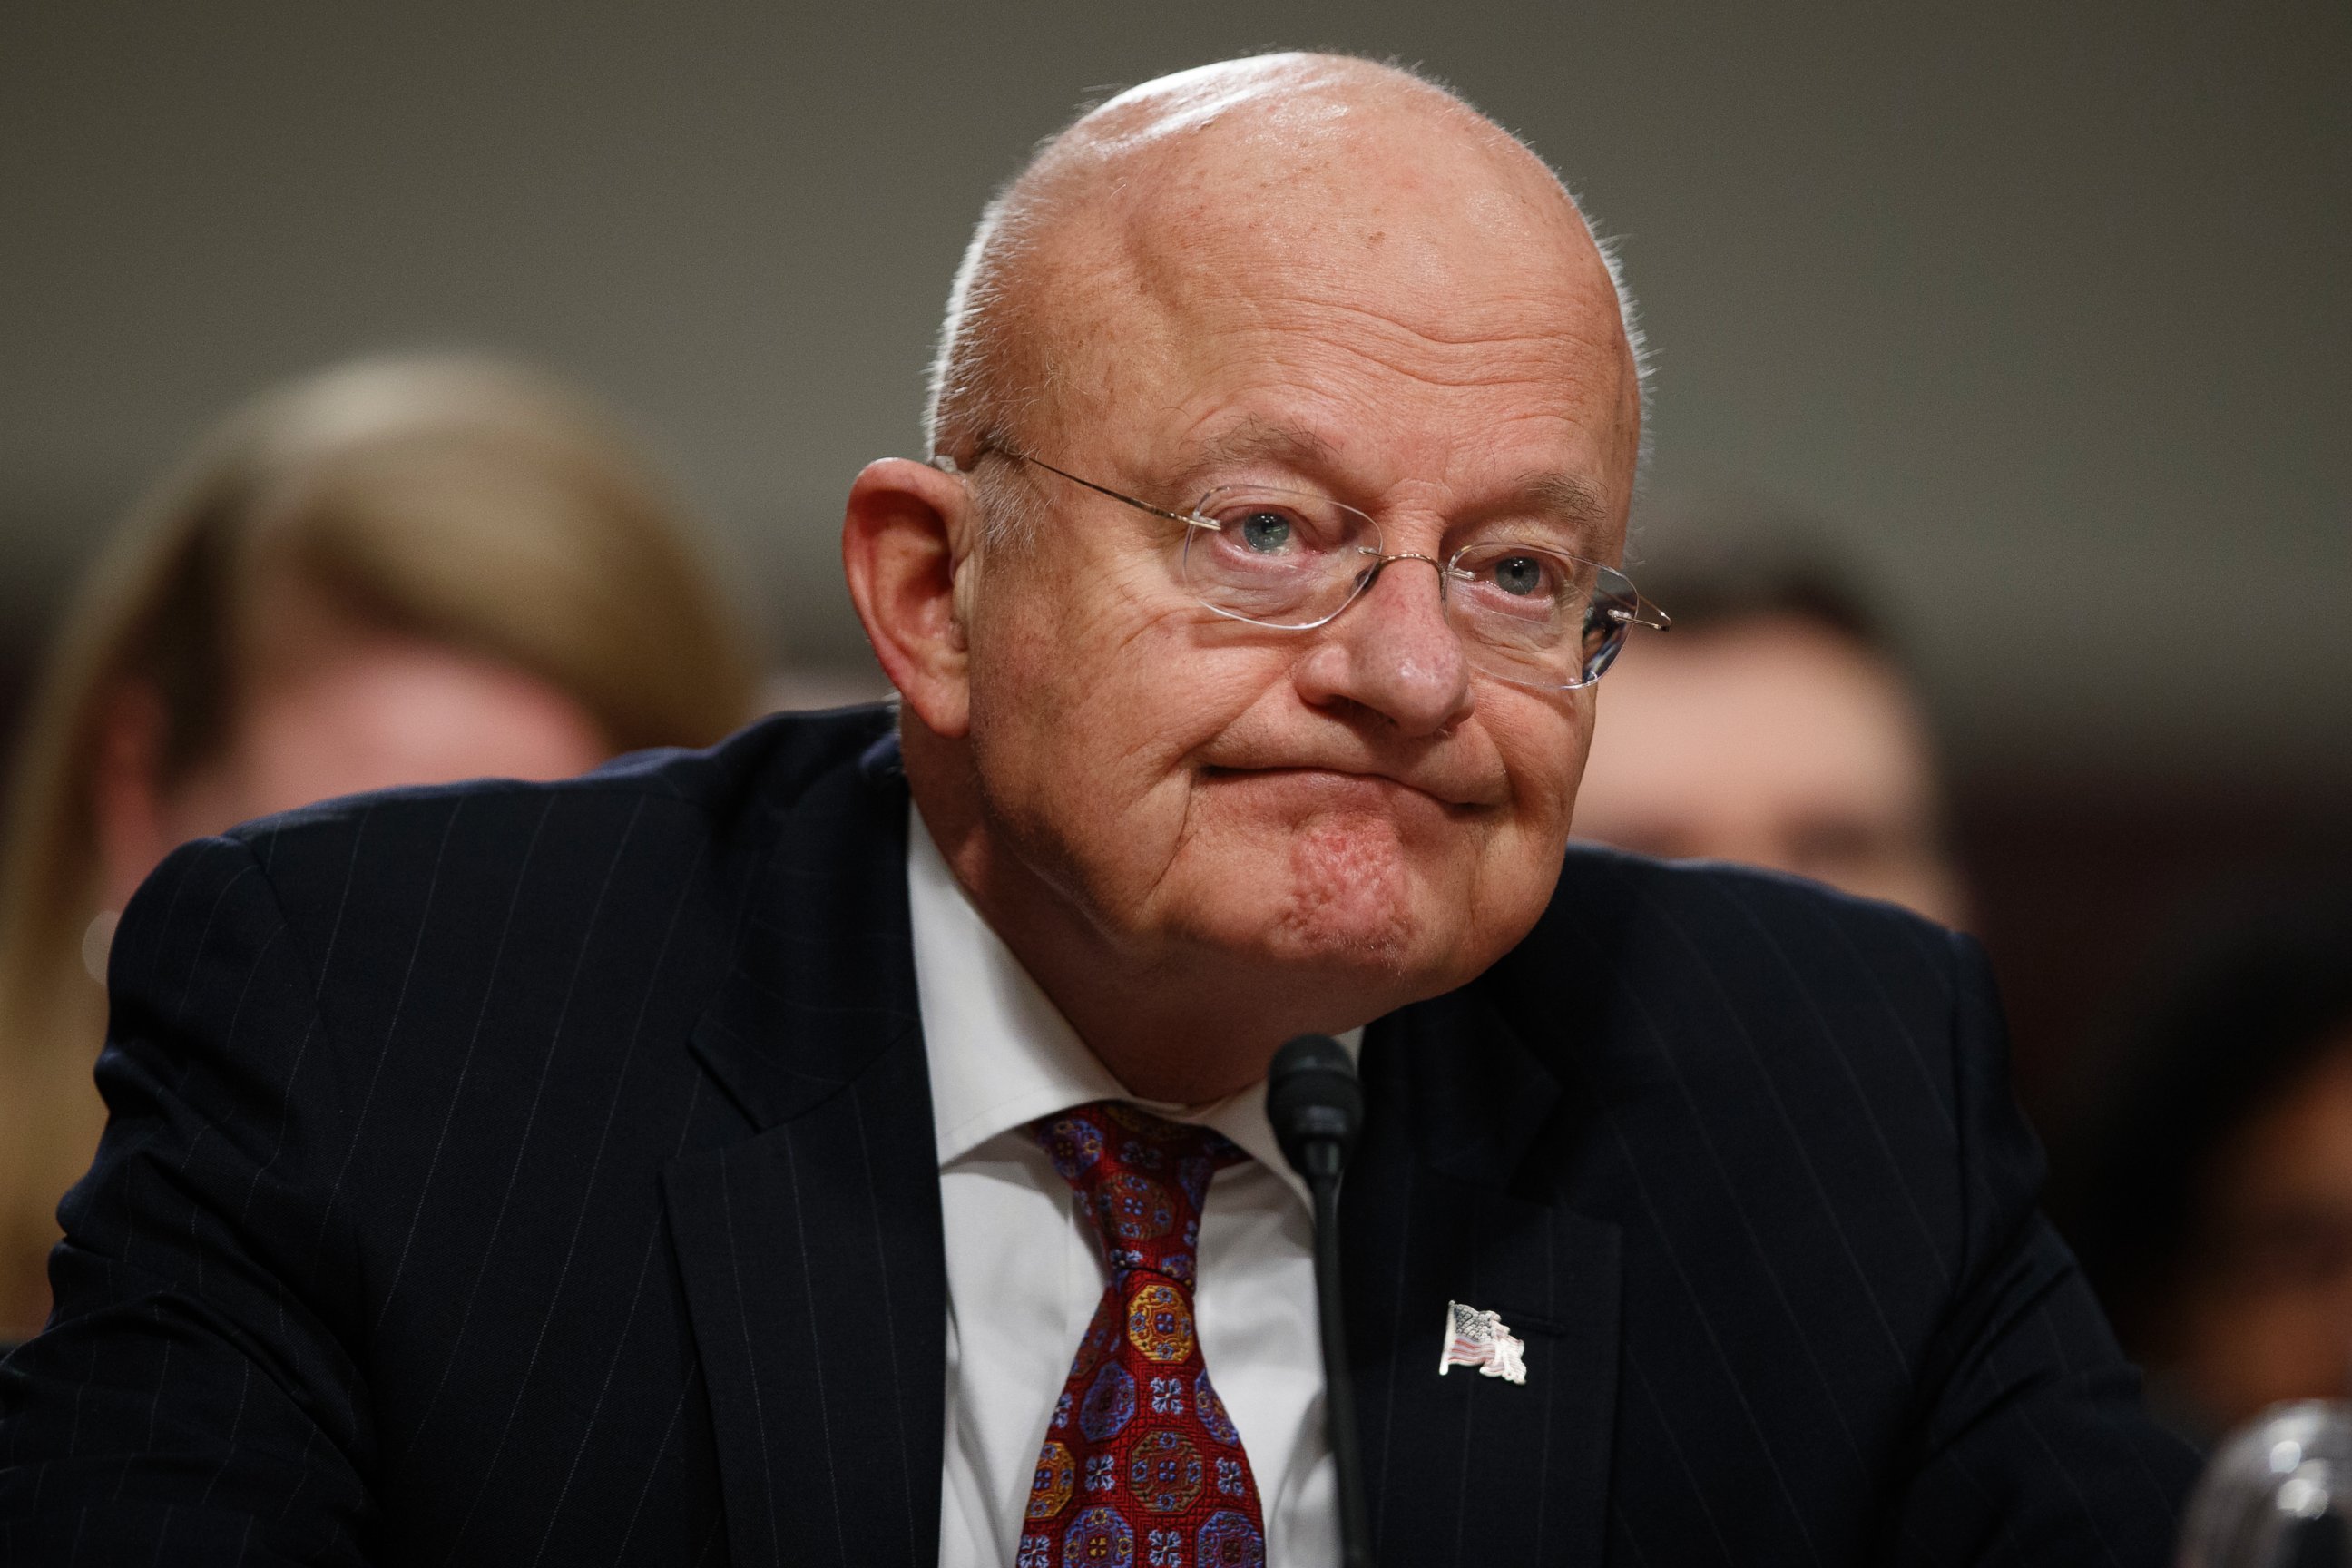 PHOTO: Director of National Intelligence James Clapper testifies on Capitol Hill in Washington, D.C., Jan. 5, 2017, before the Senate Armed Services Committee hearing: "Foreign Cyber Threats to the United States."  